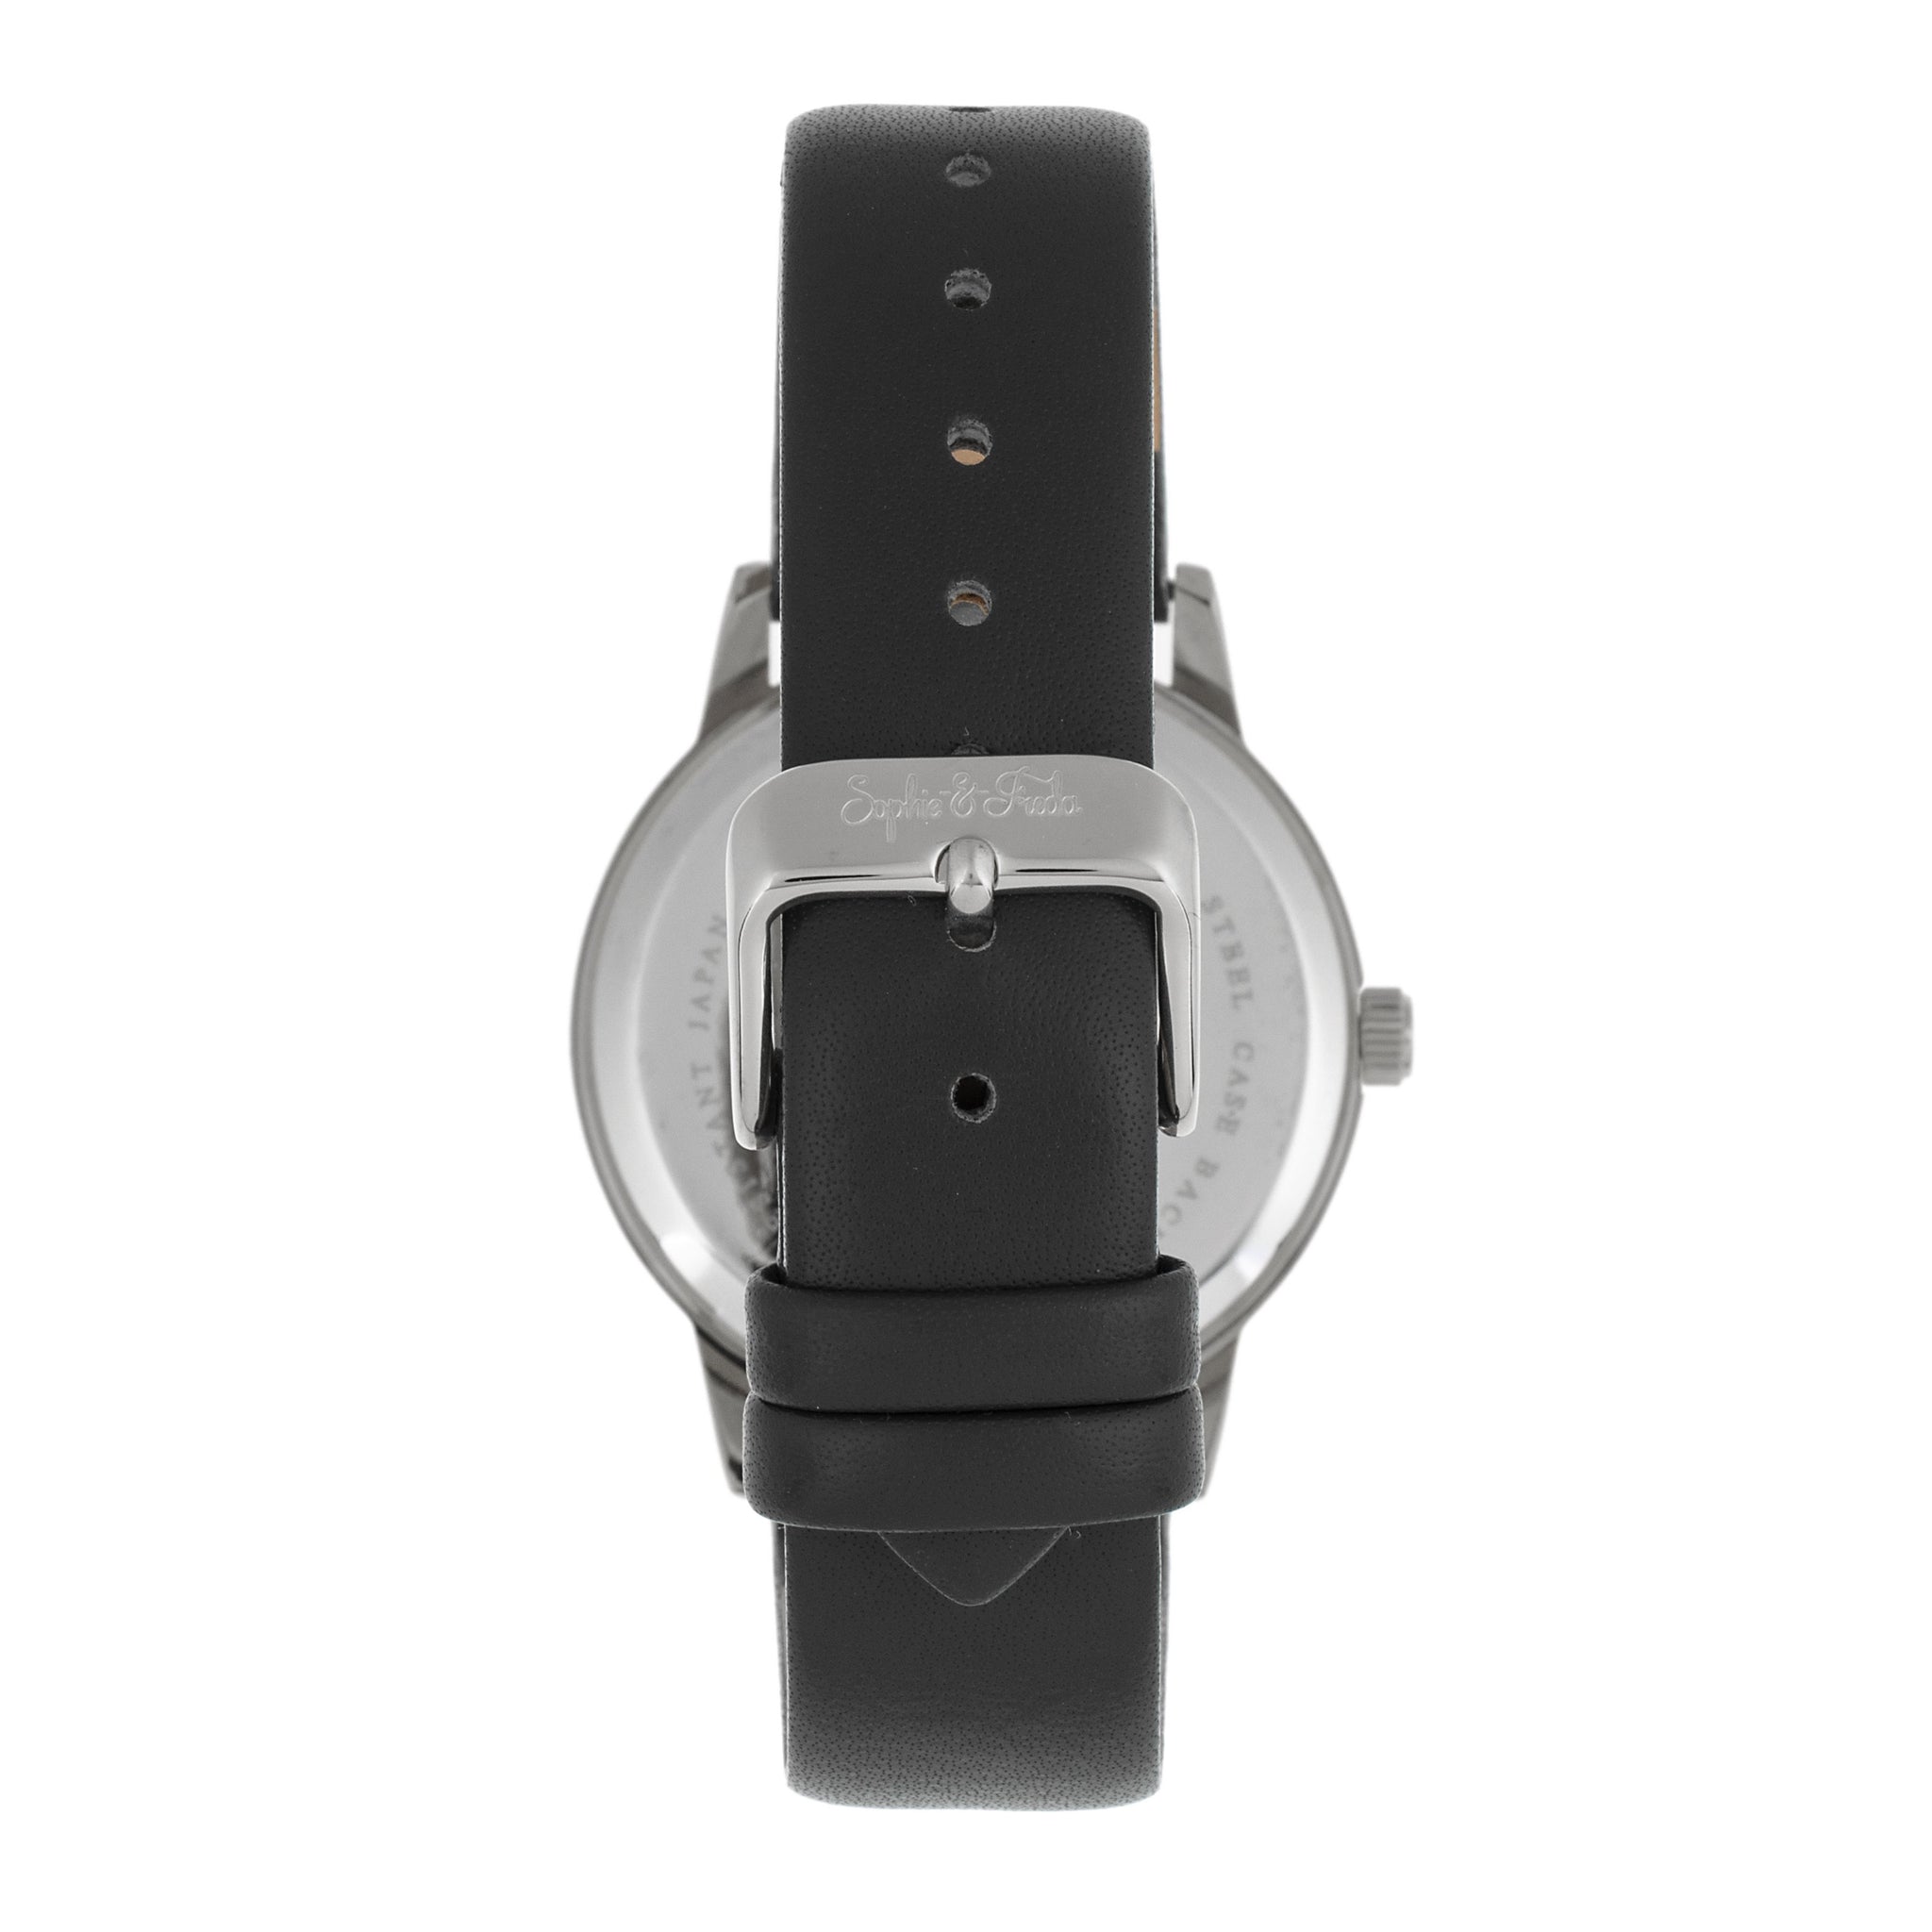 Sophie and Freda San Diego Leather-Band Watch - Black - SAFSF5101